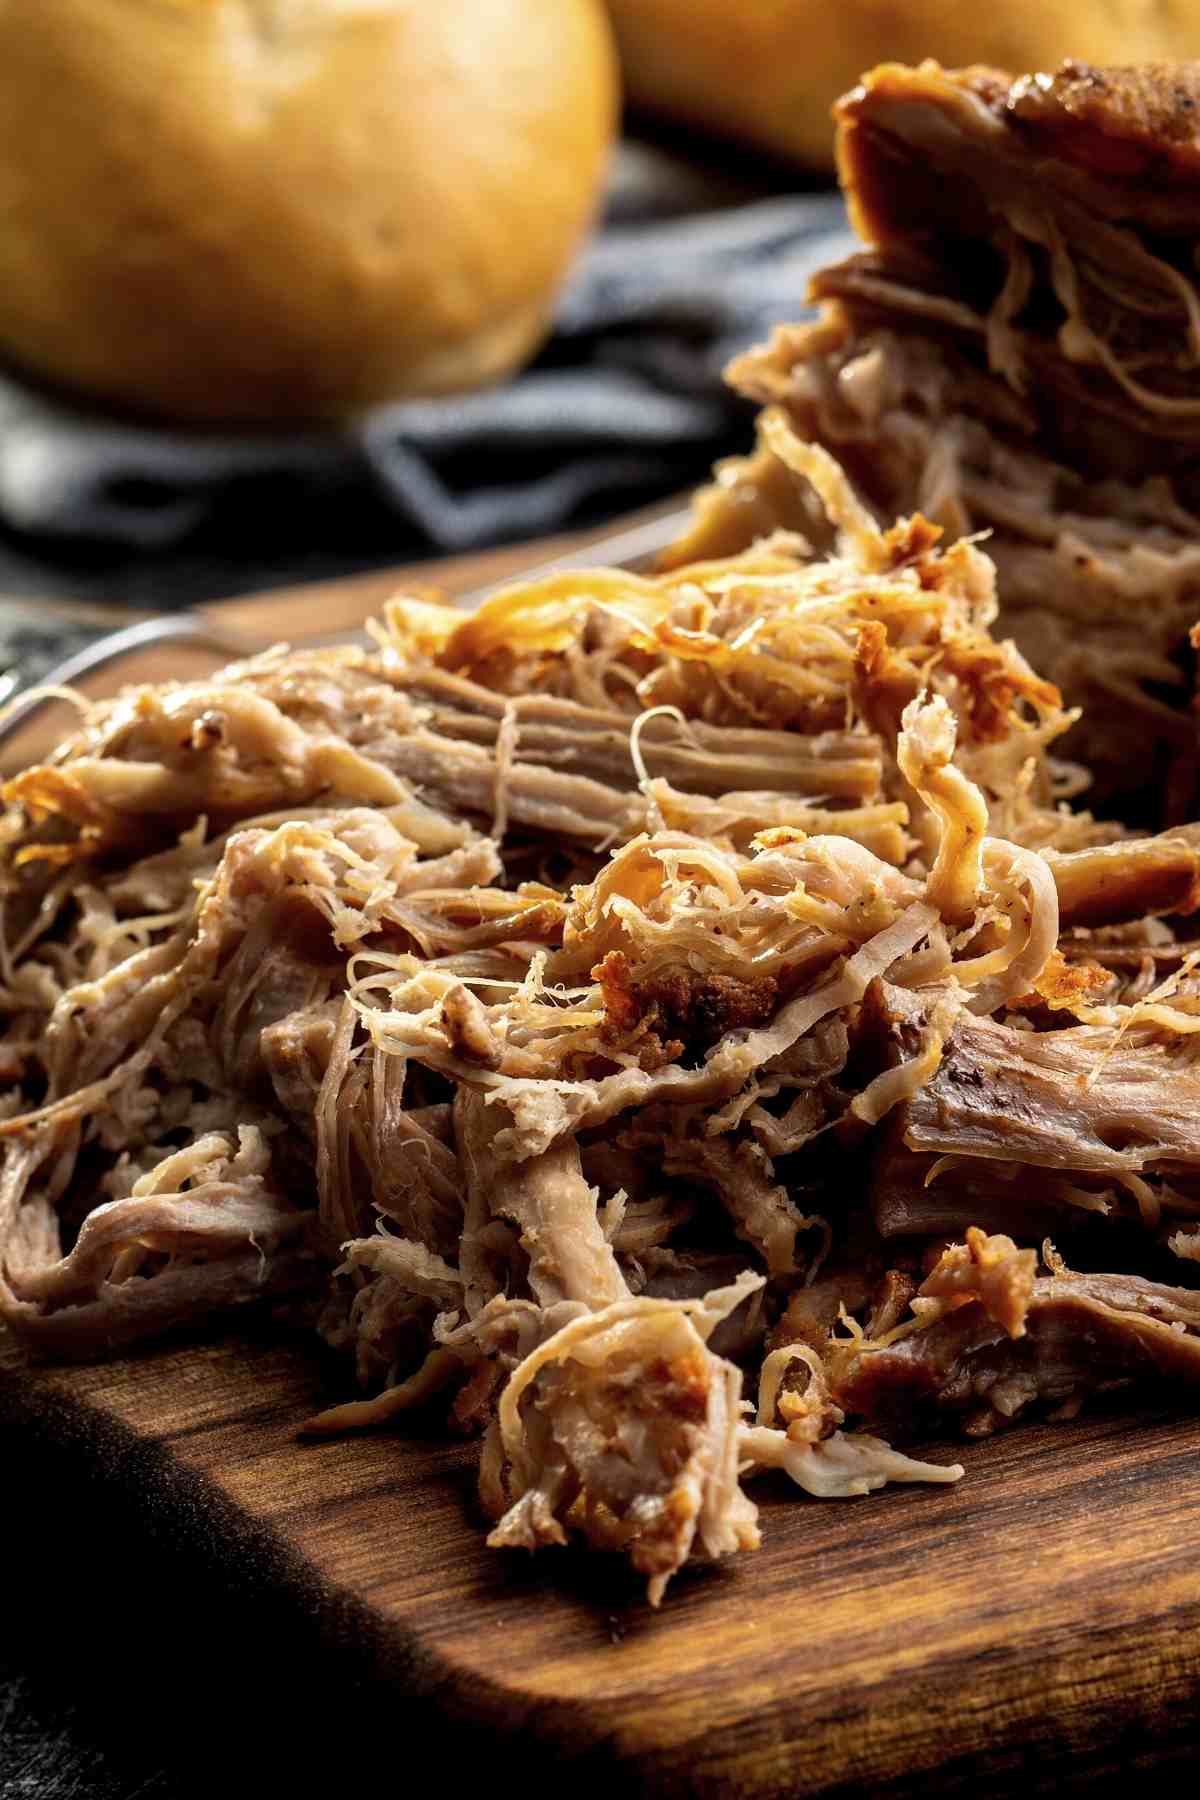 A slow cooker makes easy work of this shredded beef recipe. Set it up in the morning, and come back to perfectly tender roast beef that’s ready to be shredded.